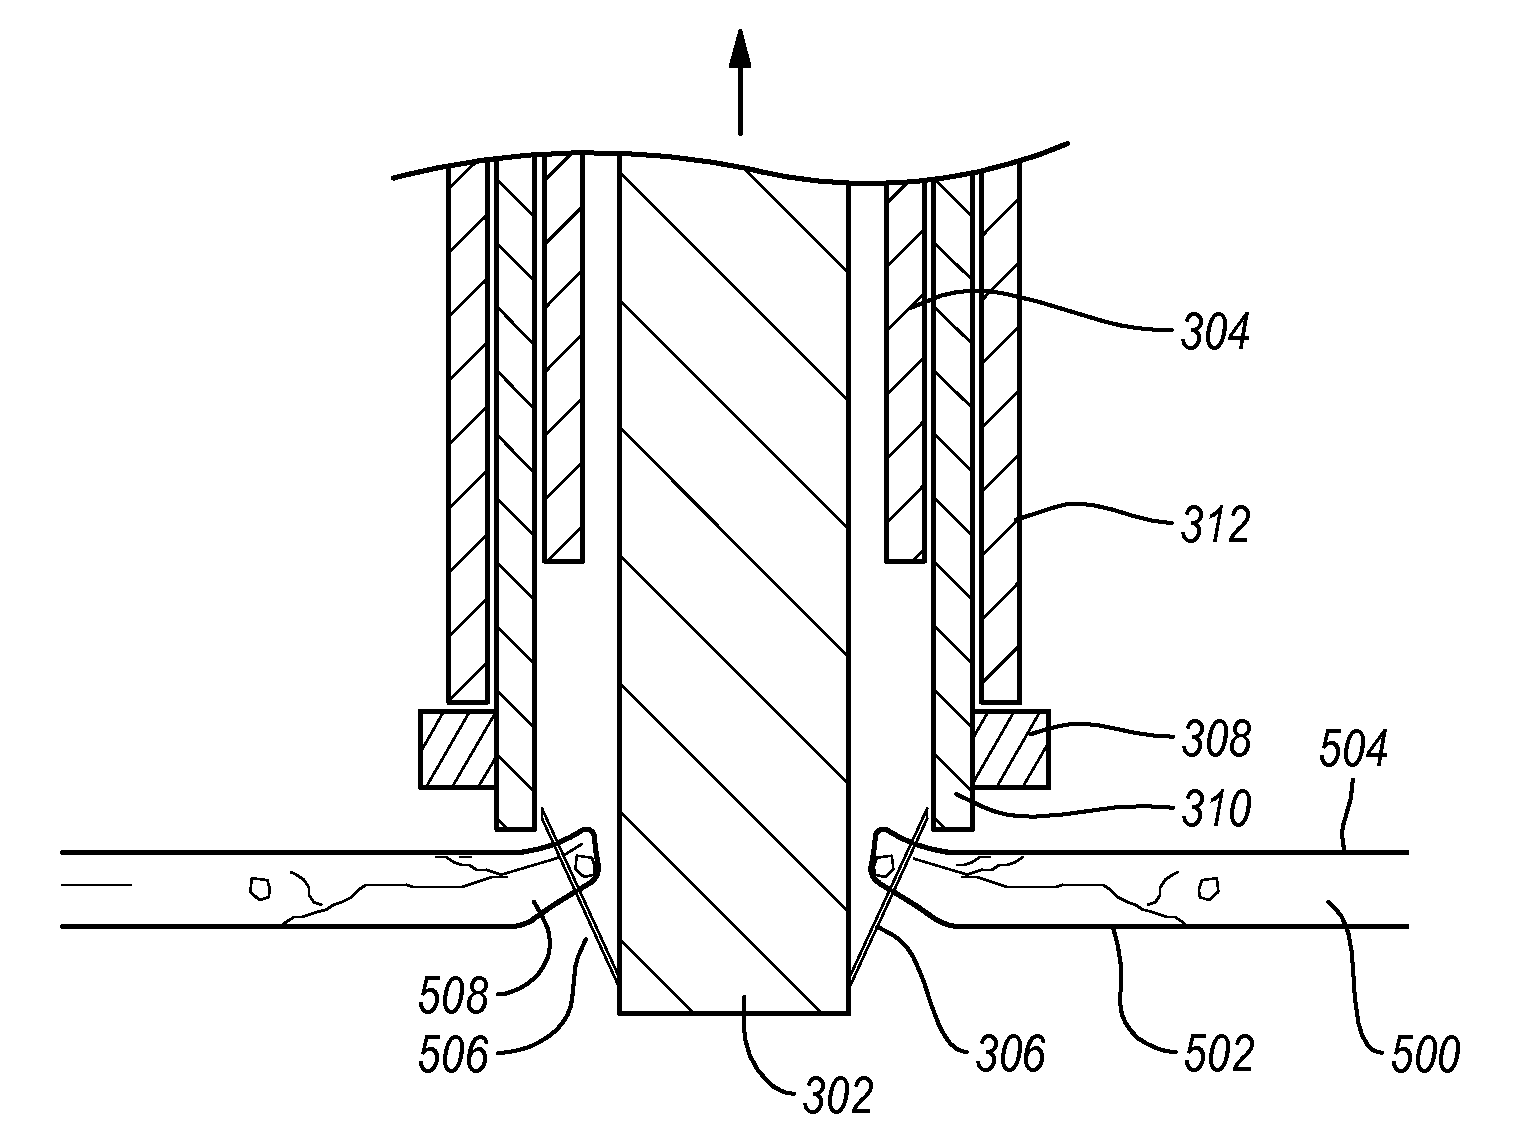 Tissue eversion apparatus and tissue closure device and methods for use thereof